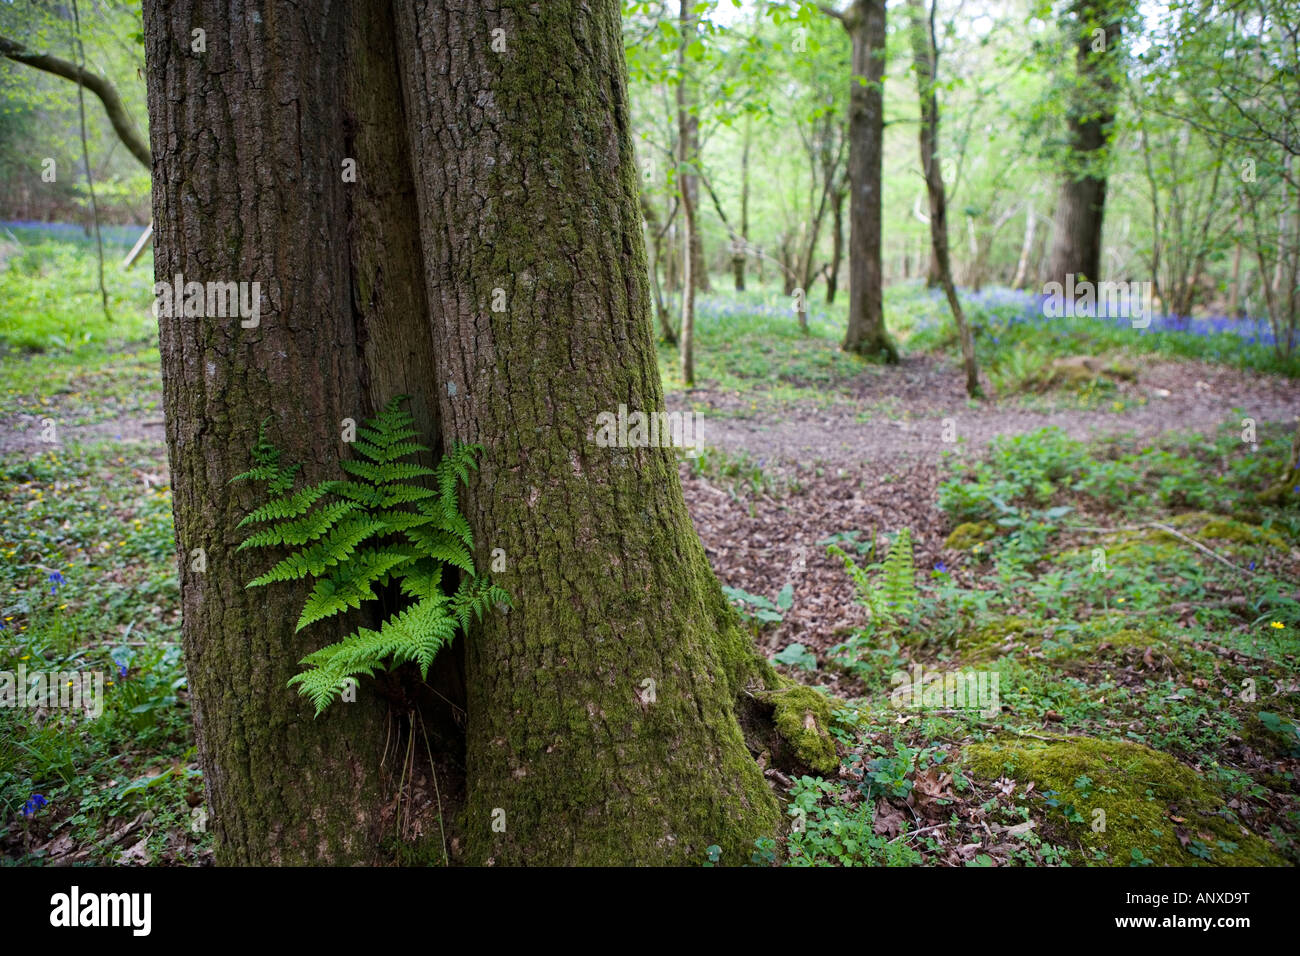 Fern growing in a tree trunk in an English woodland in spring Stock Photo